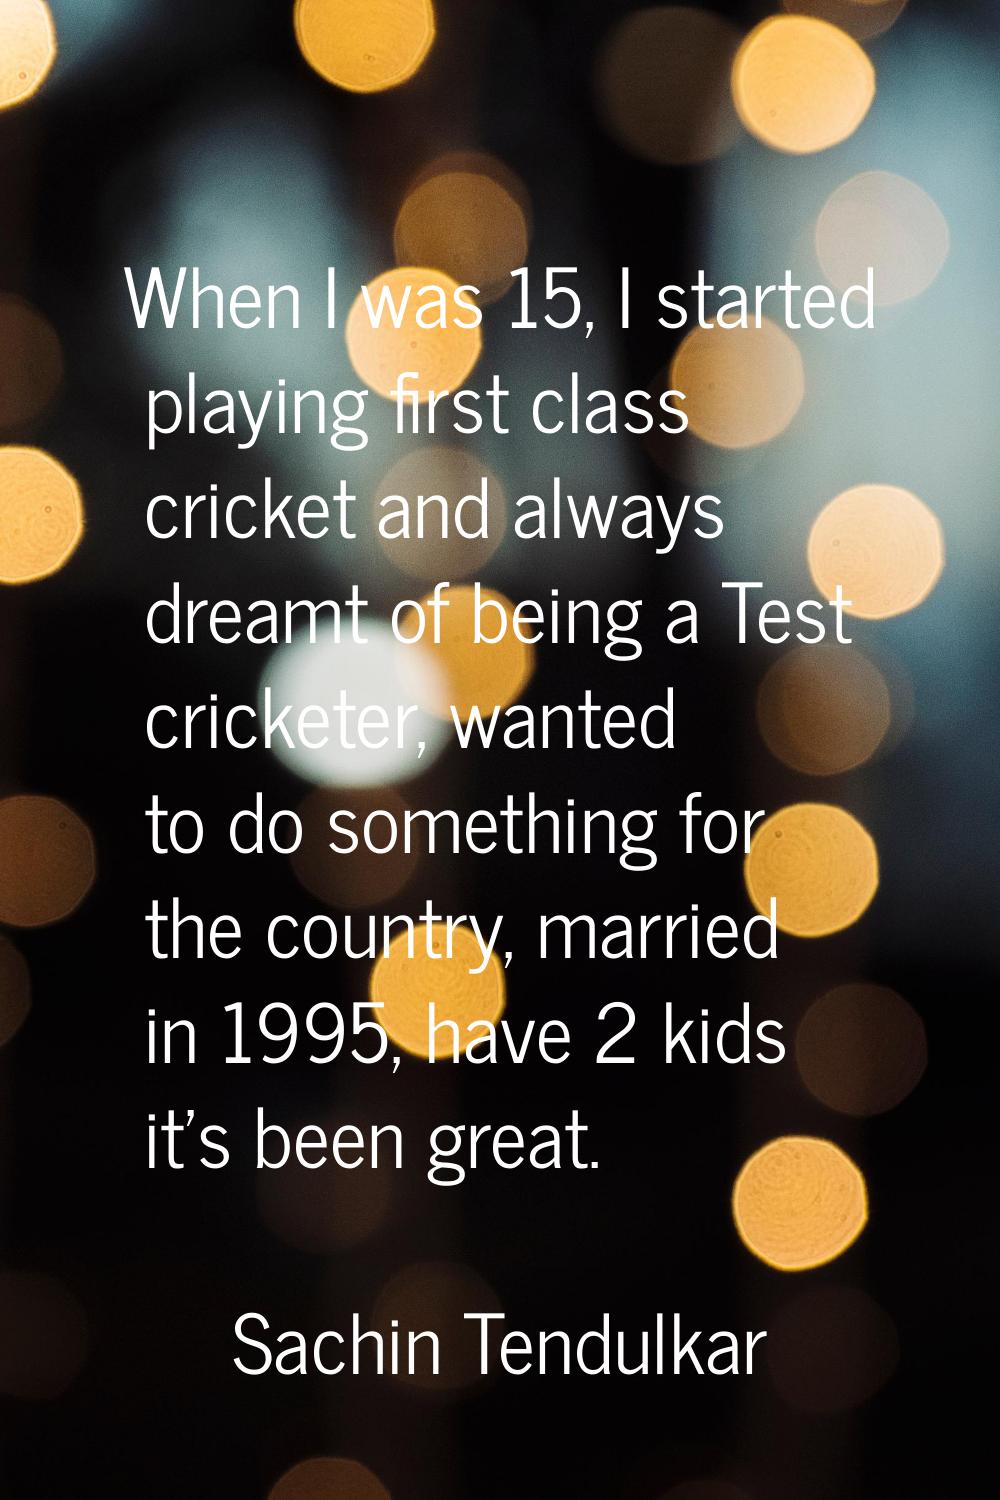 When I was 15, I started playing first class cricket and always dreamt of being a Test cricketer, w